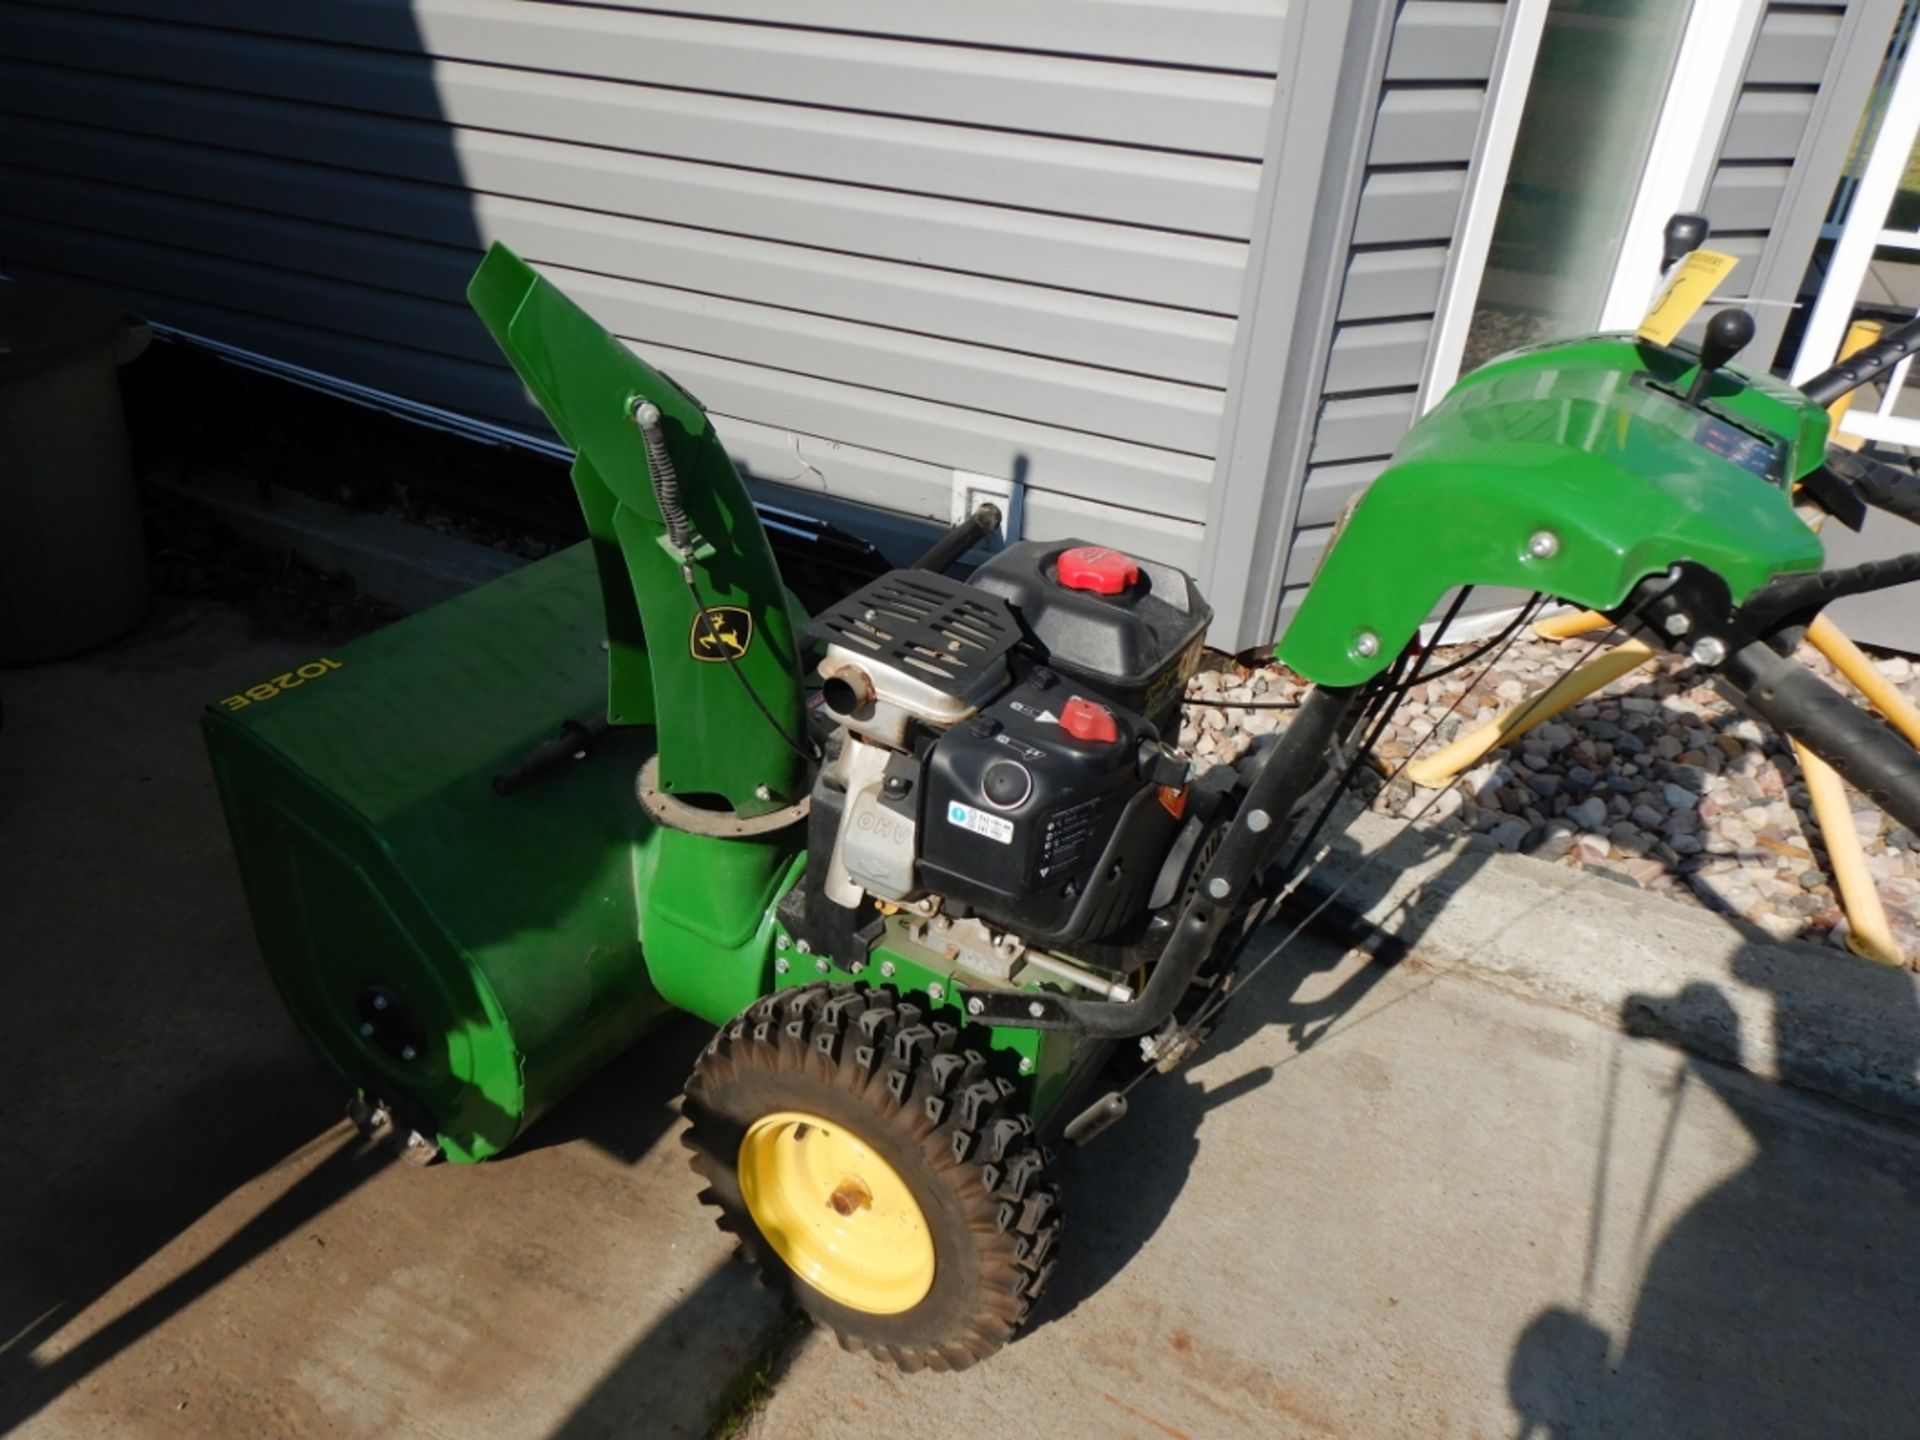 JOHN DEERE 1028E 2-STAGE SNOW BLOWER 305CC W/ ELECTRIC START, S/N 1LM1028EVAB025715 - Image 3 of 7